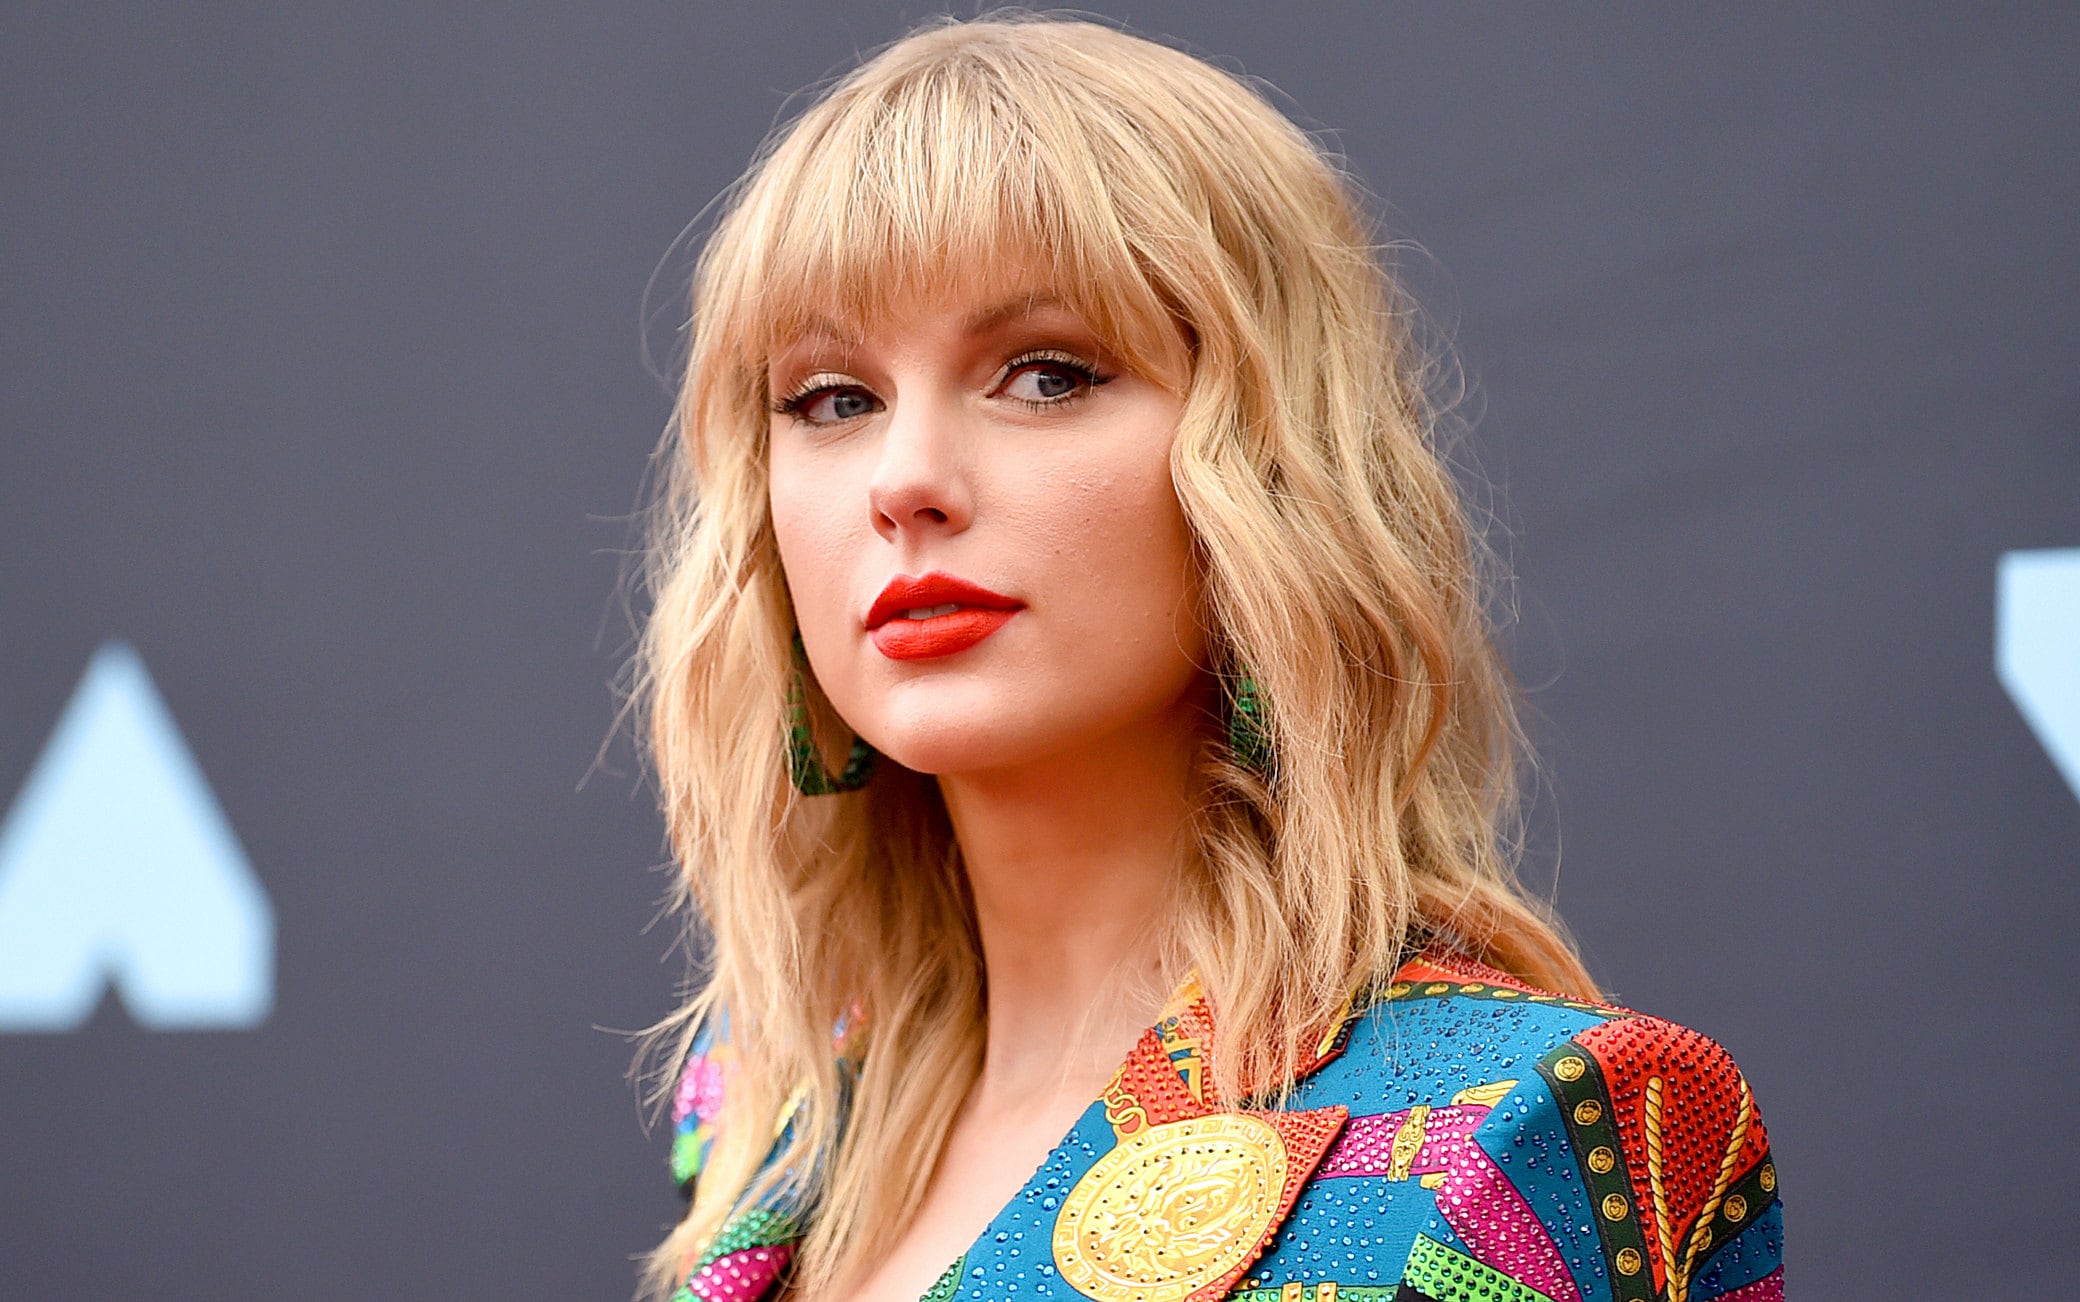 15 Taylor Swift Facts That You Probably Didn't Know